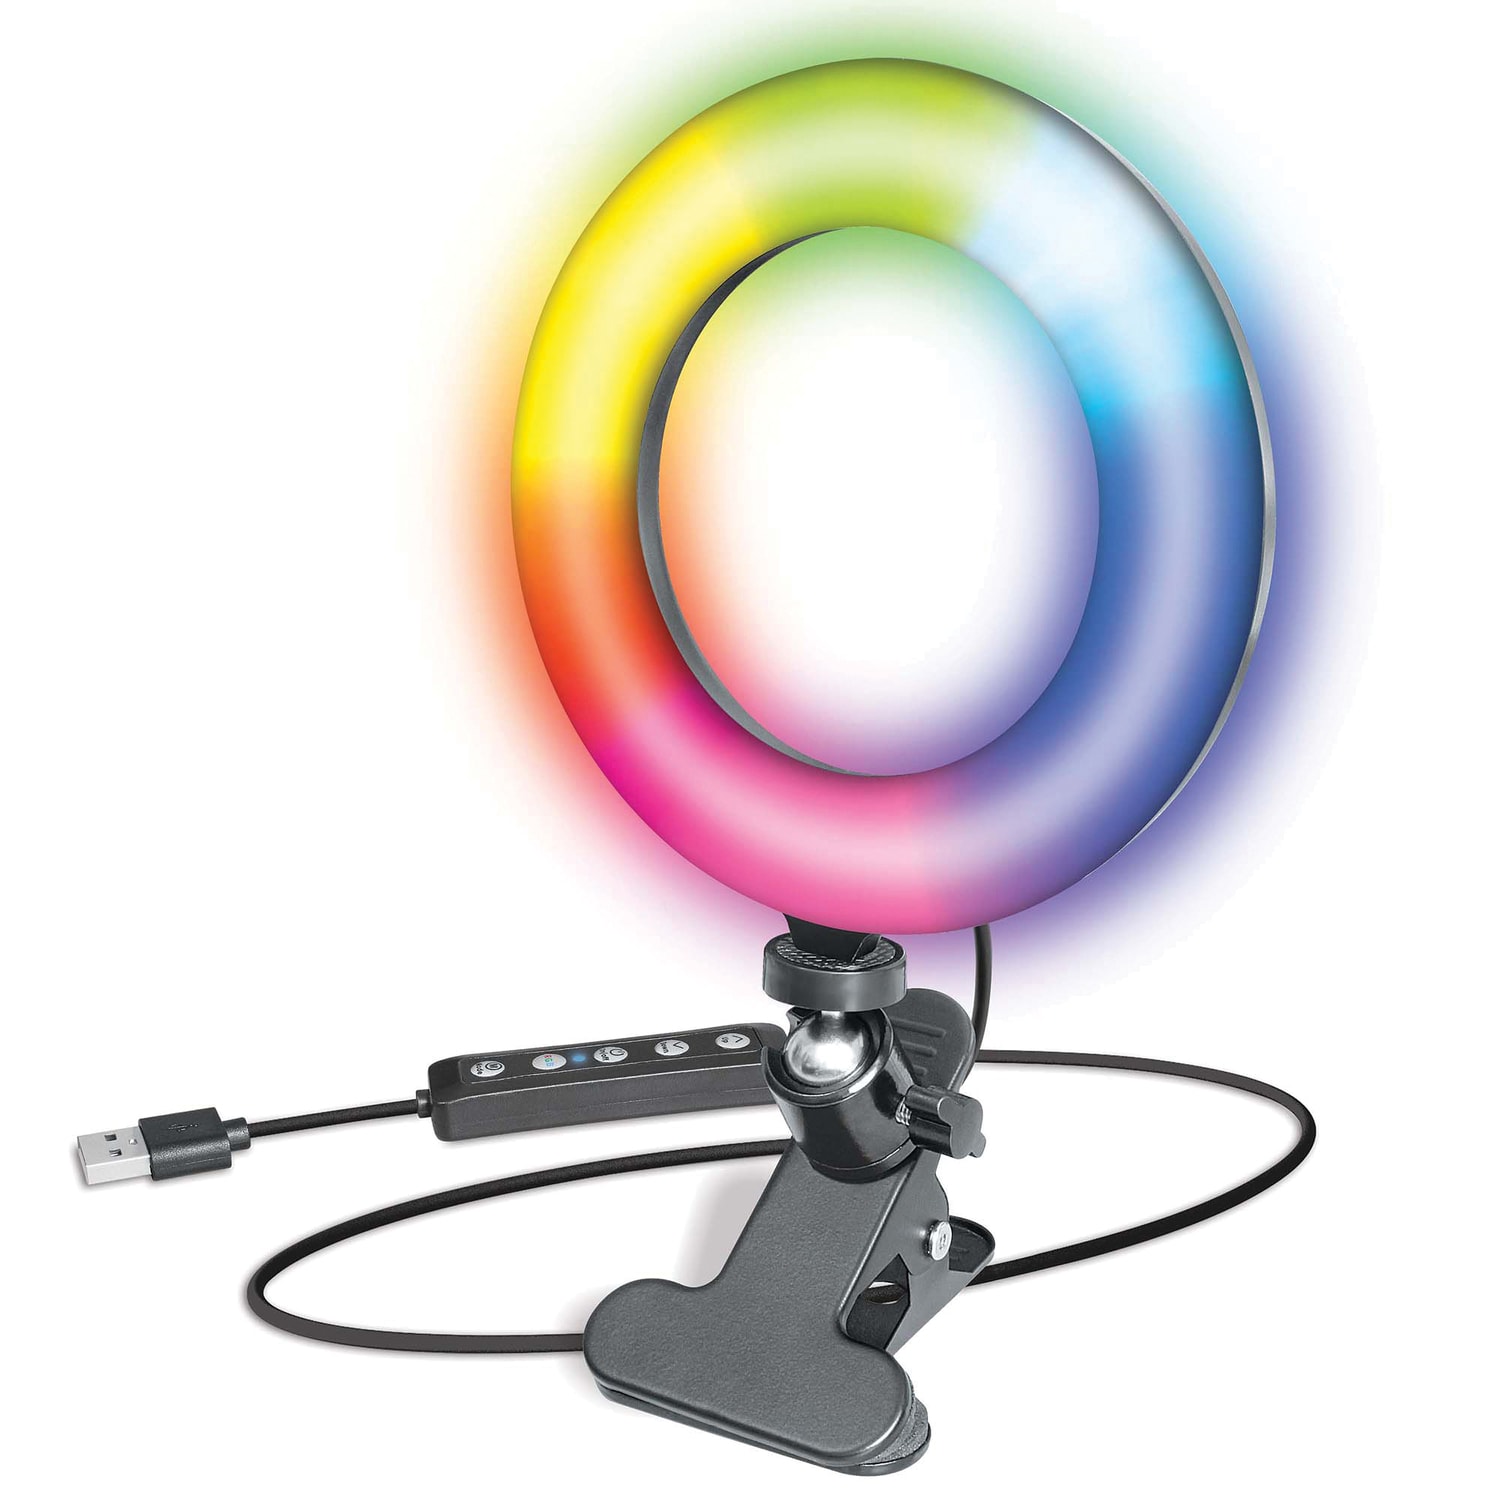 Zakje achter Bewolkt Bower 6-In. Clip-On LED Selfie Ring Light in the Smartphone & Camera  Accessories department at Lowes.com